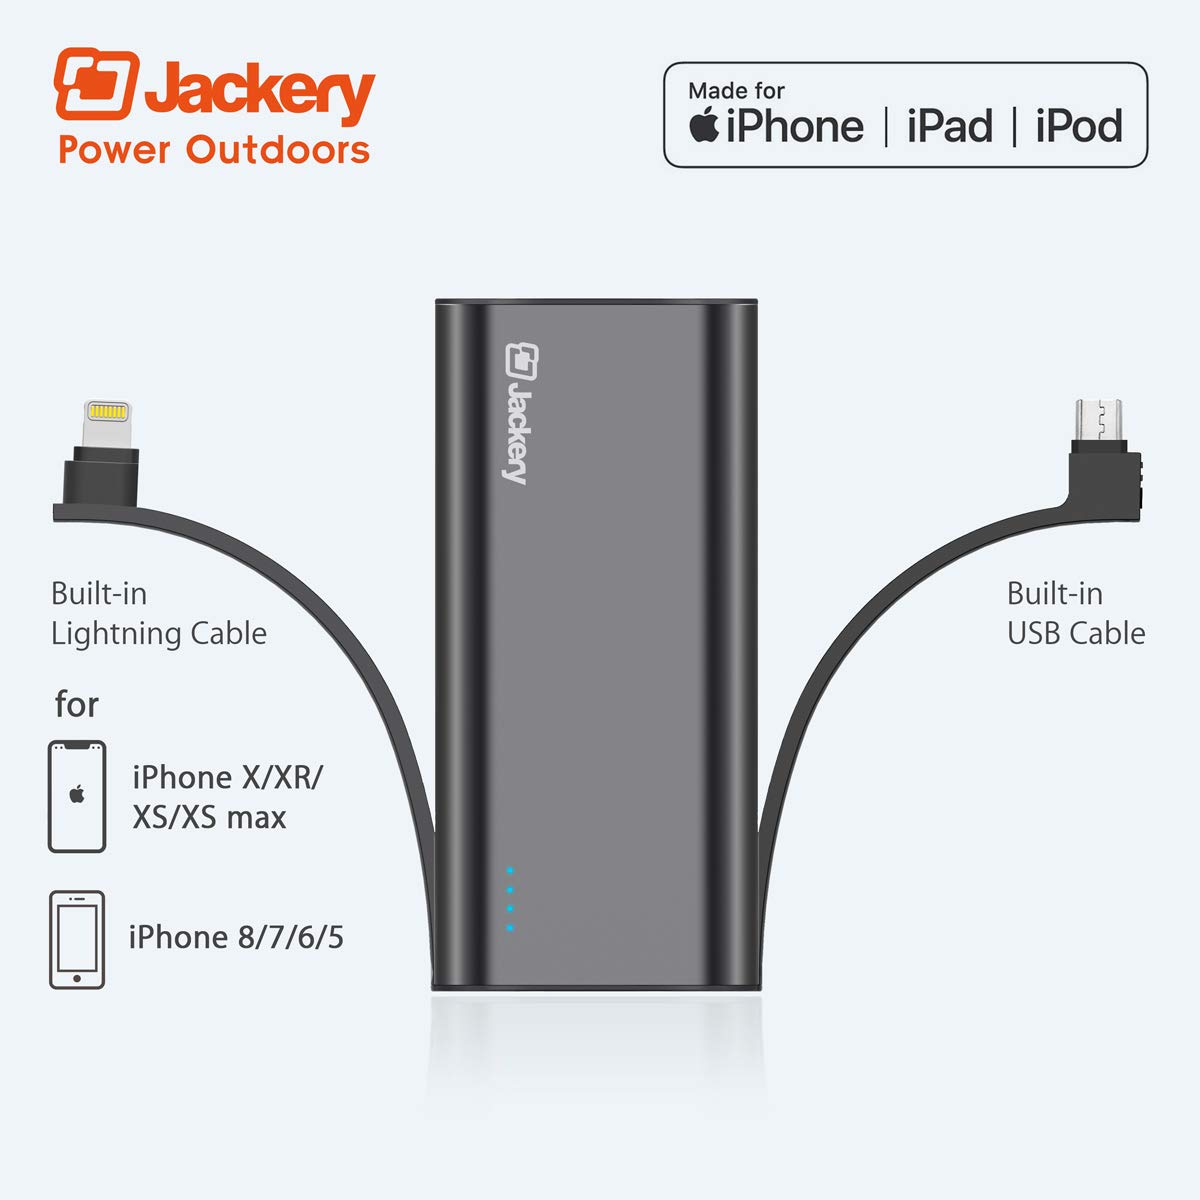 Portable Charger Jackery Bolt 6000 mAh Power Outdoors - Power bank with built in Lightning Cable [Apple MFi certified] iPhone Battery Charger External Battery, TWICE as FAST as Original iPhone Charger